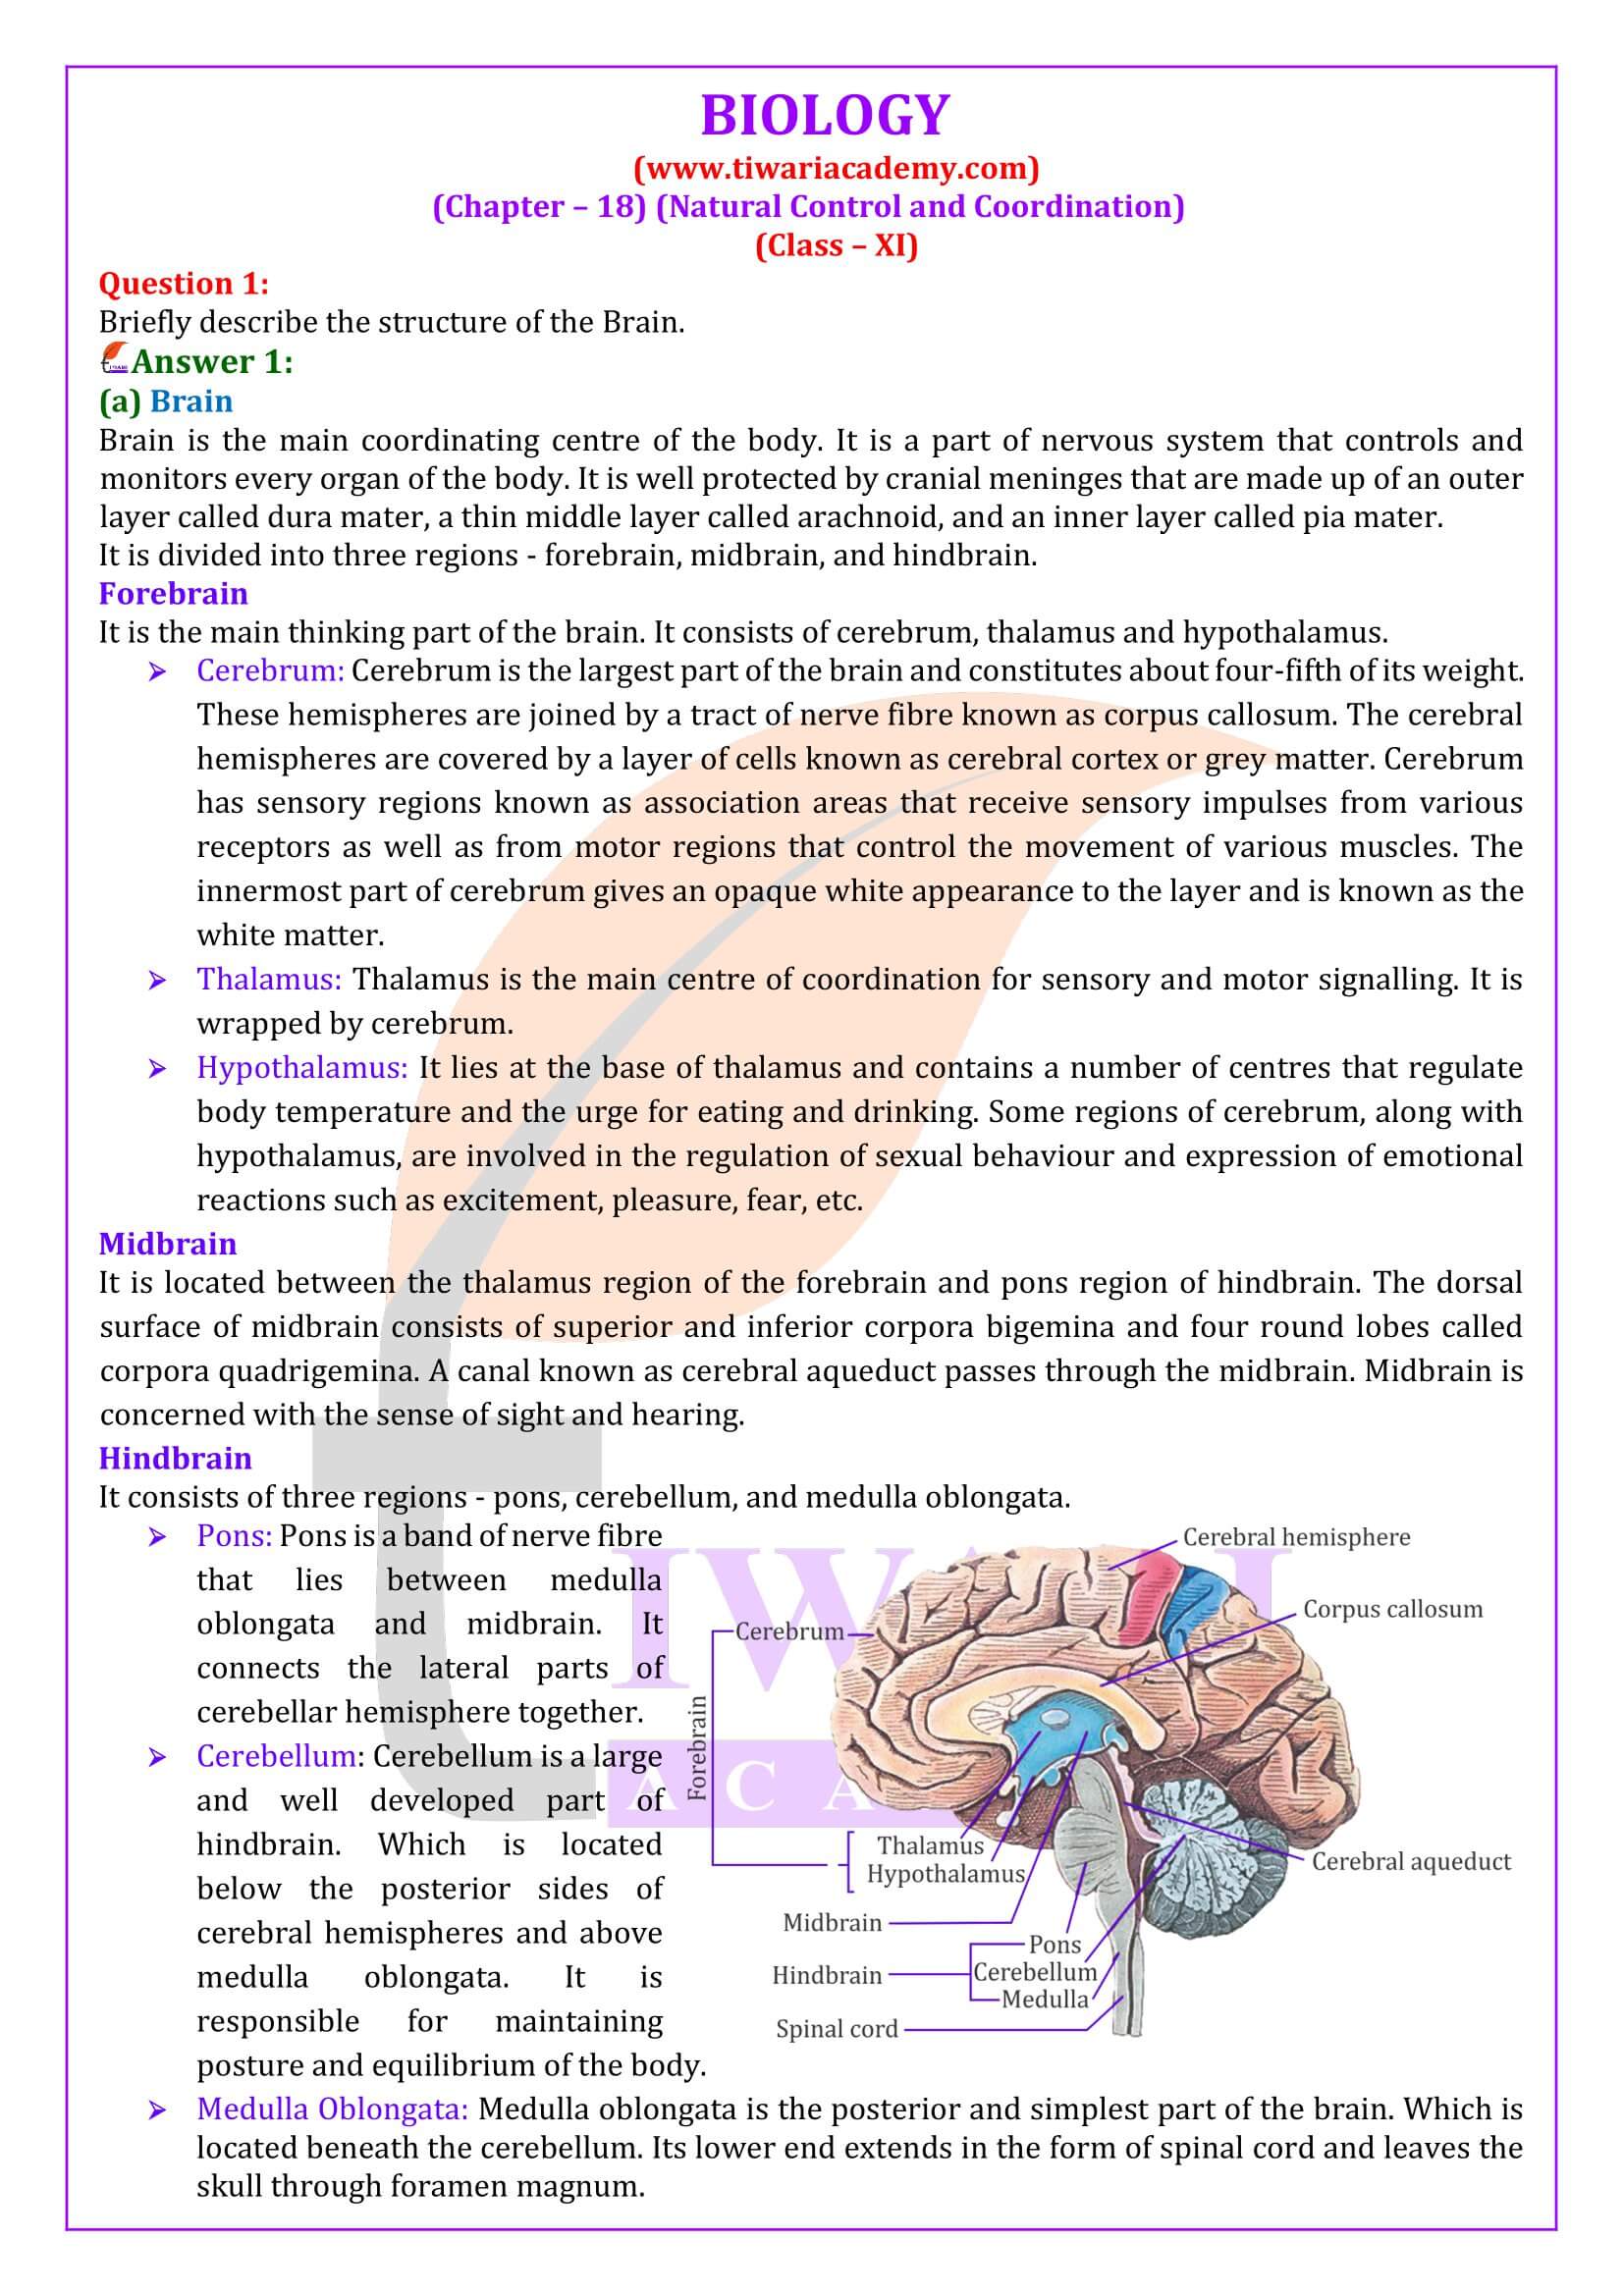 NCERT Solutions for Class 11 Biology Chapter 18